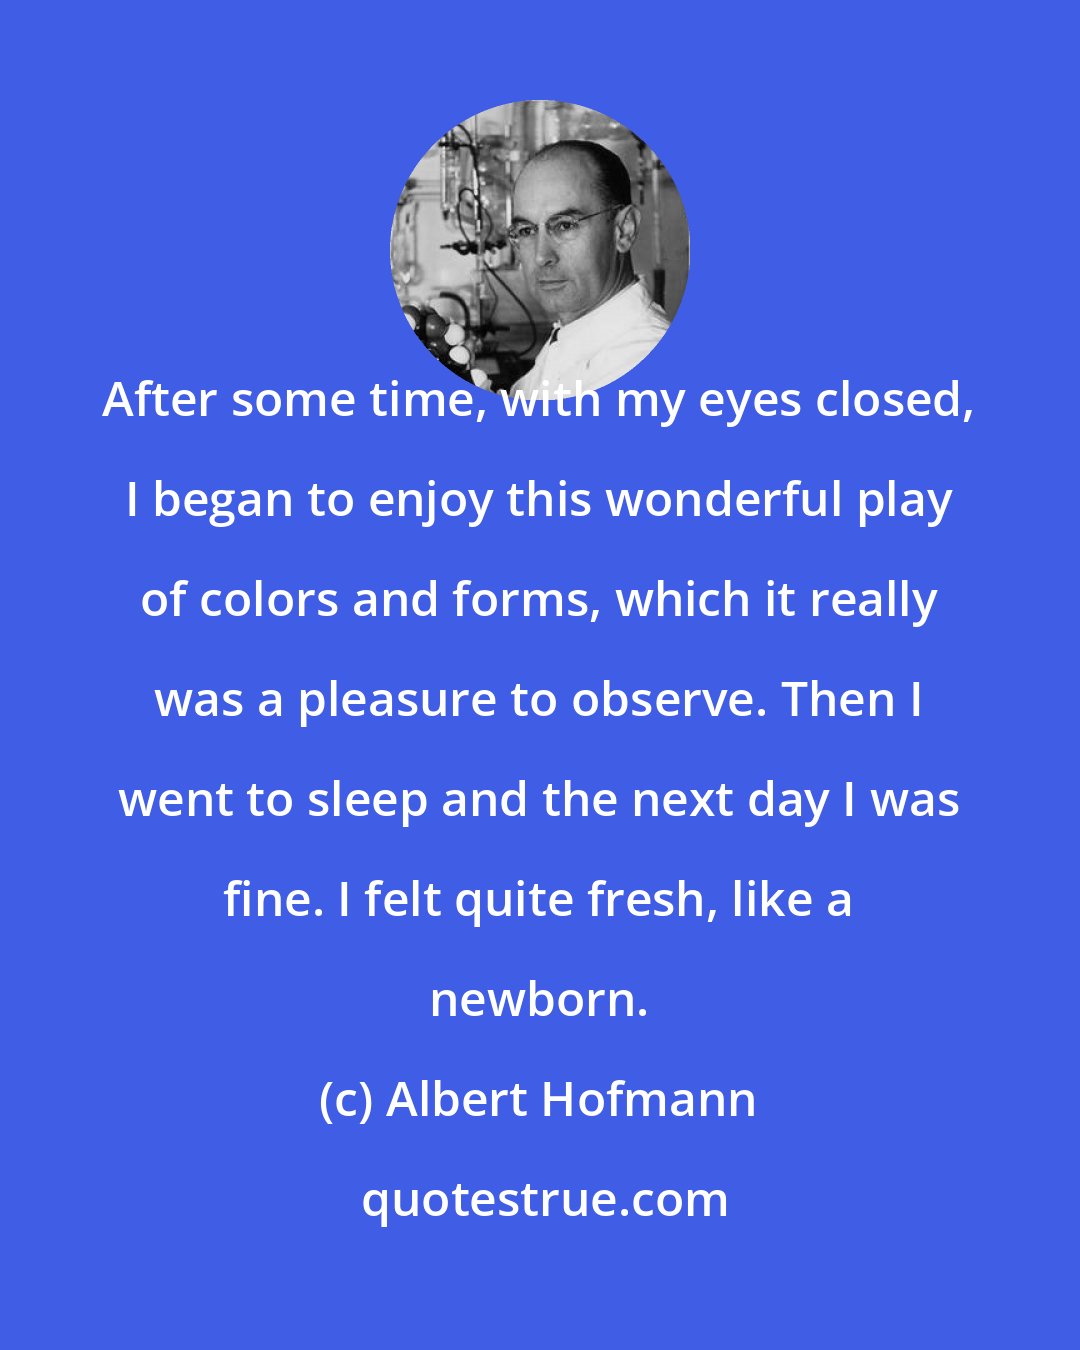 Albert Hofmann: After some time, with my eyes closed, I began to enjoy this wonderful play of colors and forms, which it really was a pleasure to observe. Then I went to sleep and the next day I was fine. I felt quite fresh, like a newborn.